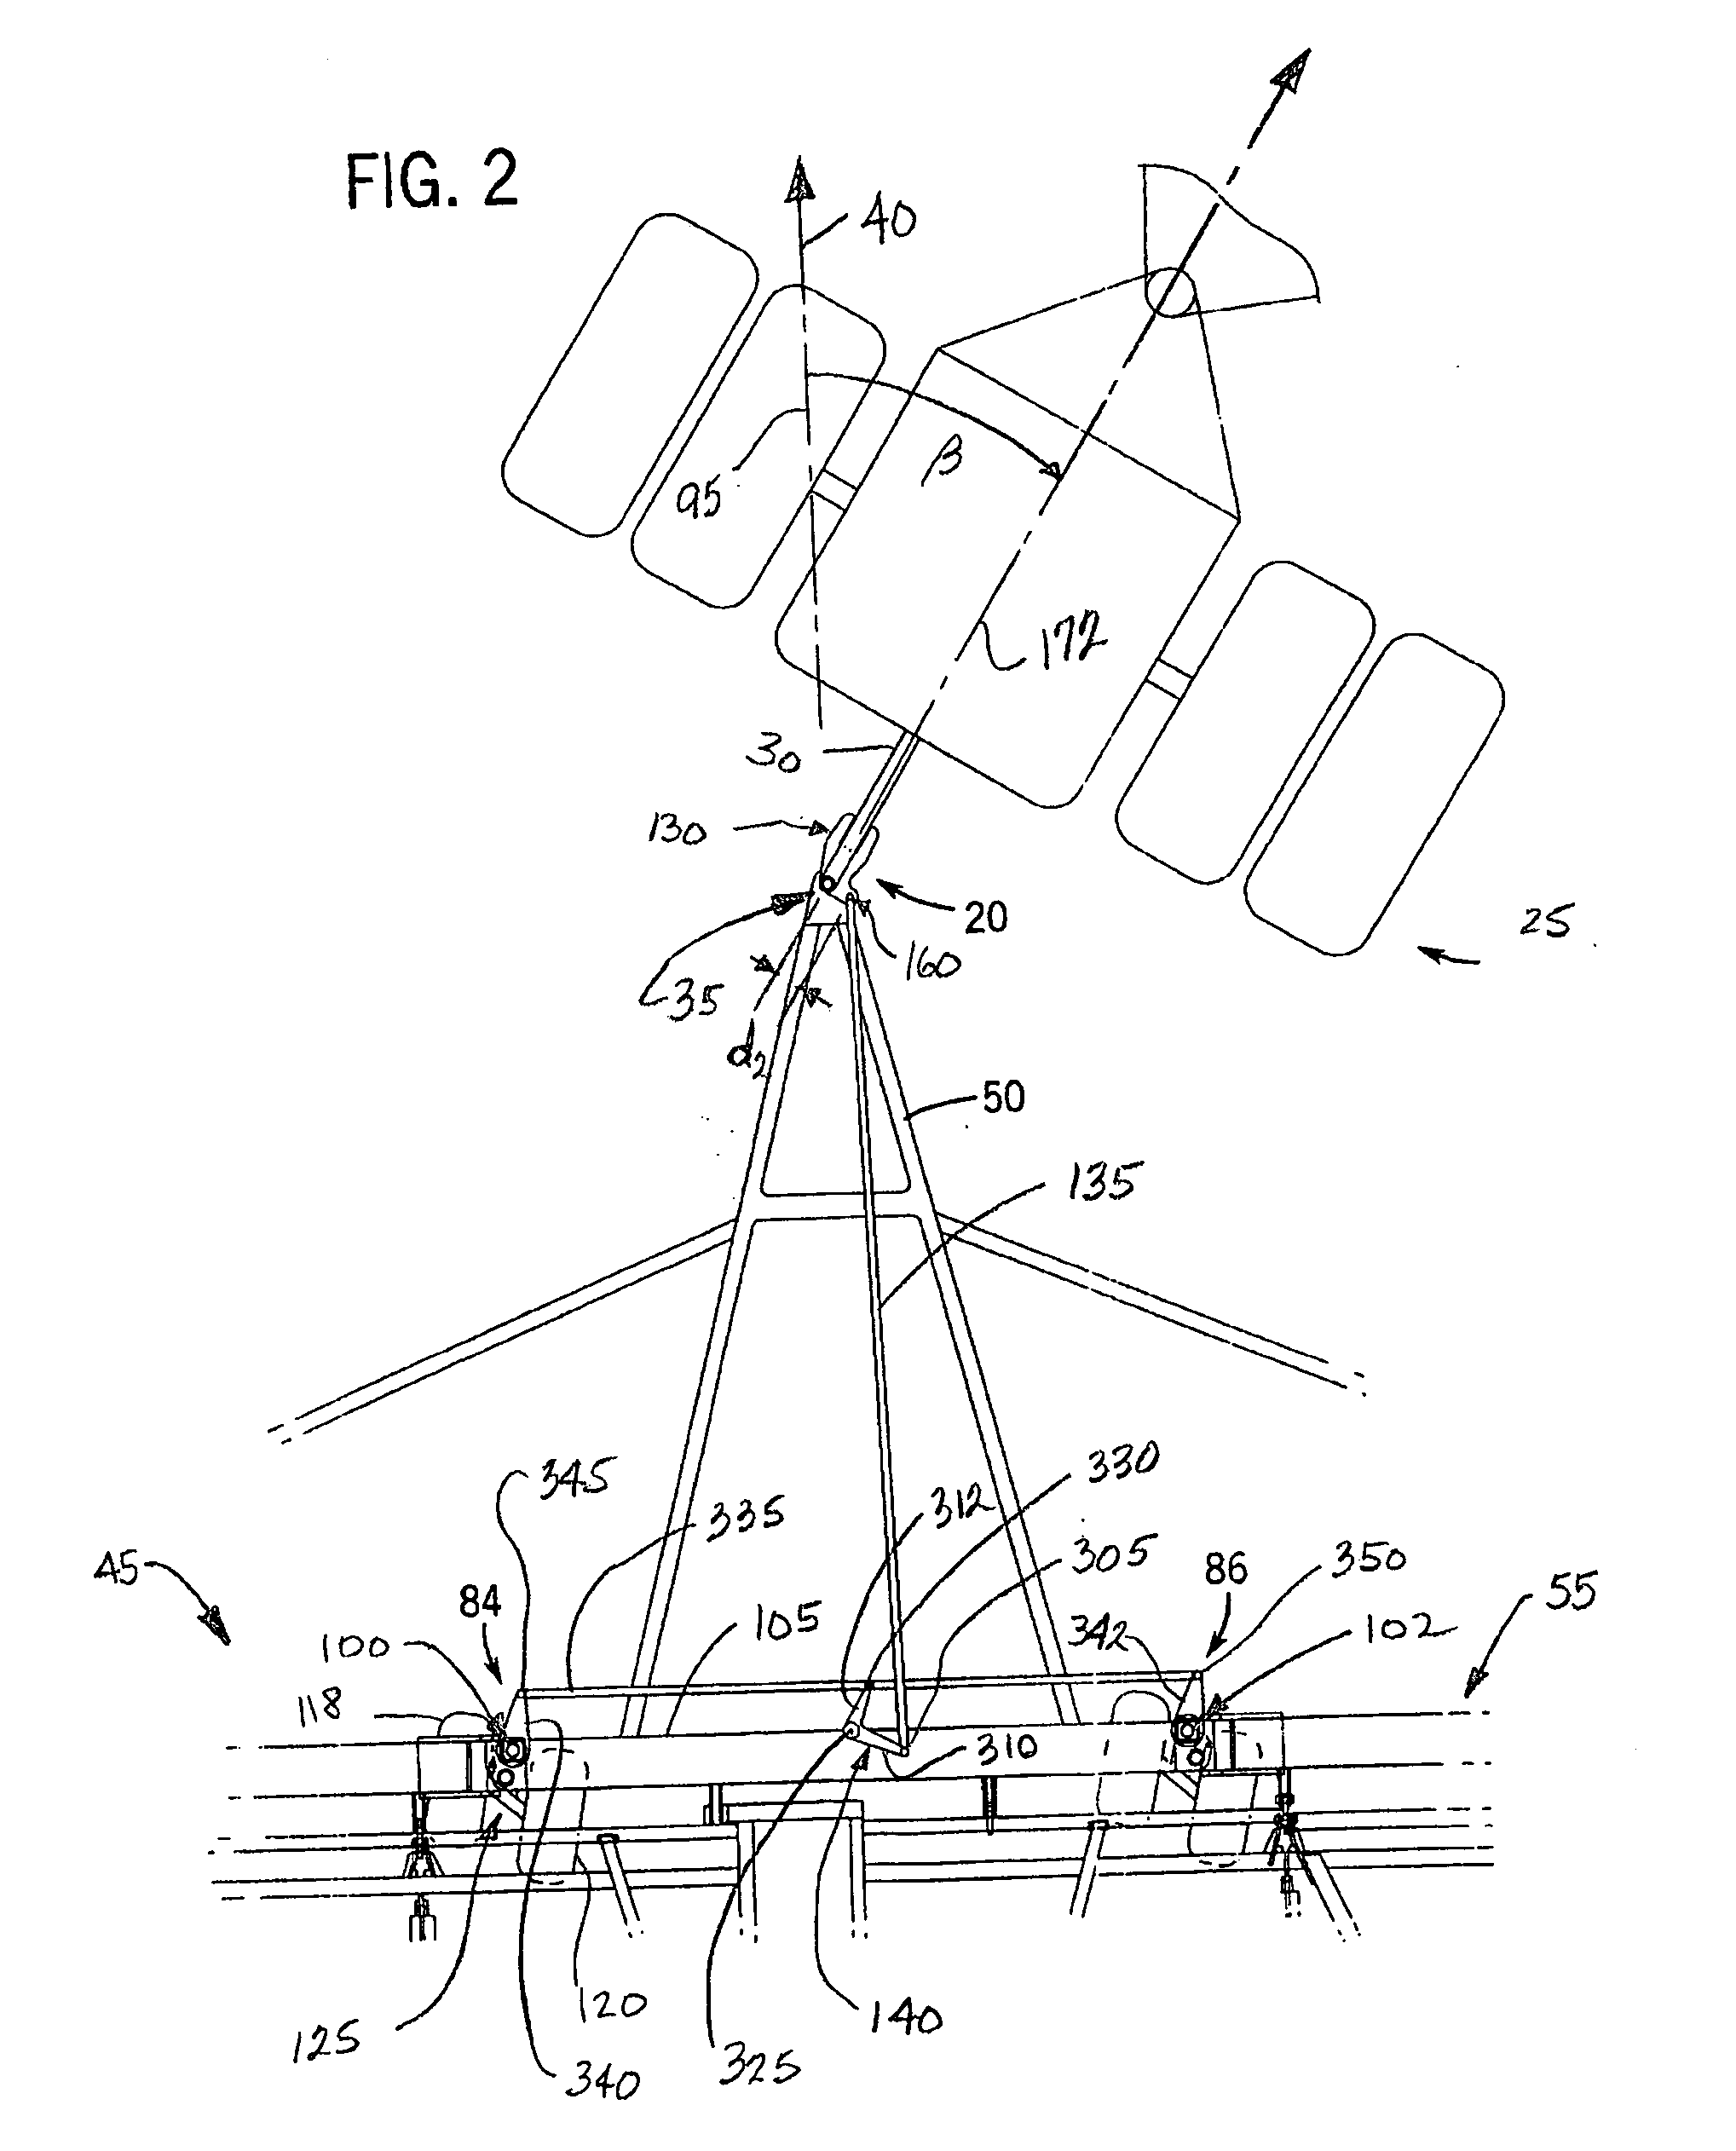 Steering connection assembly